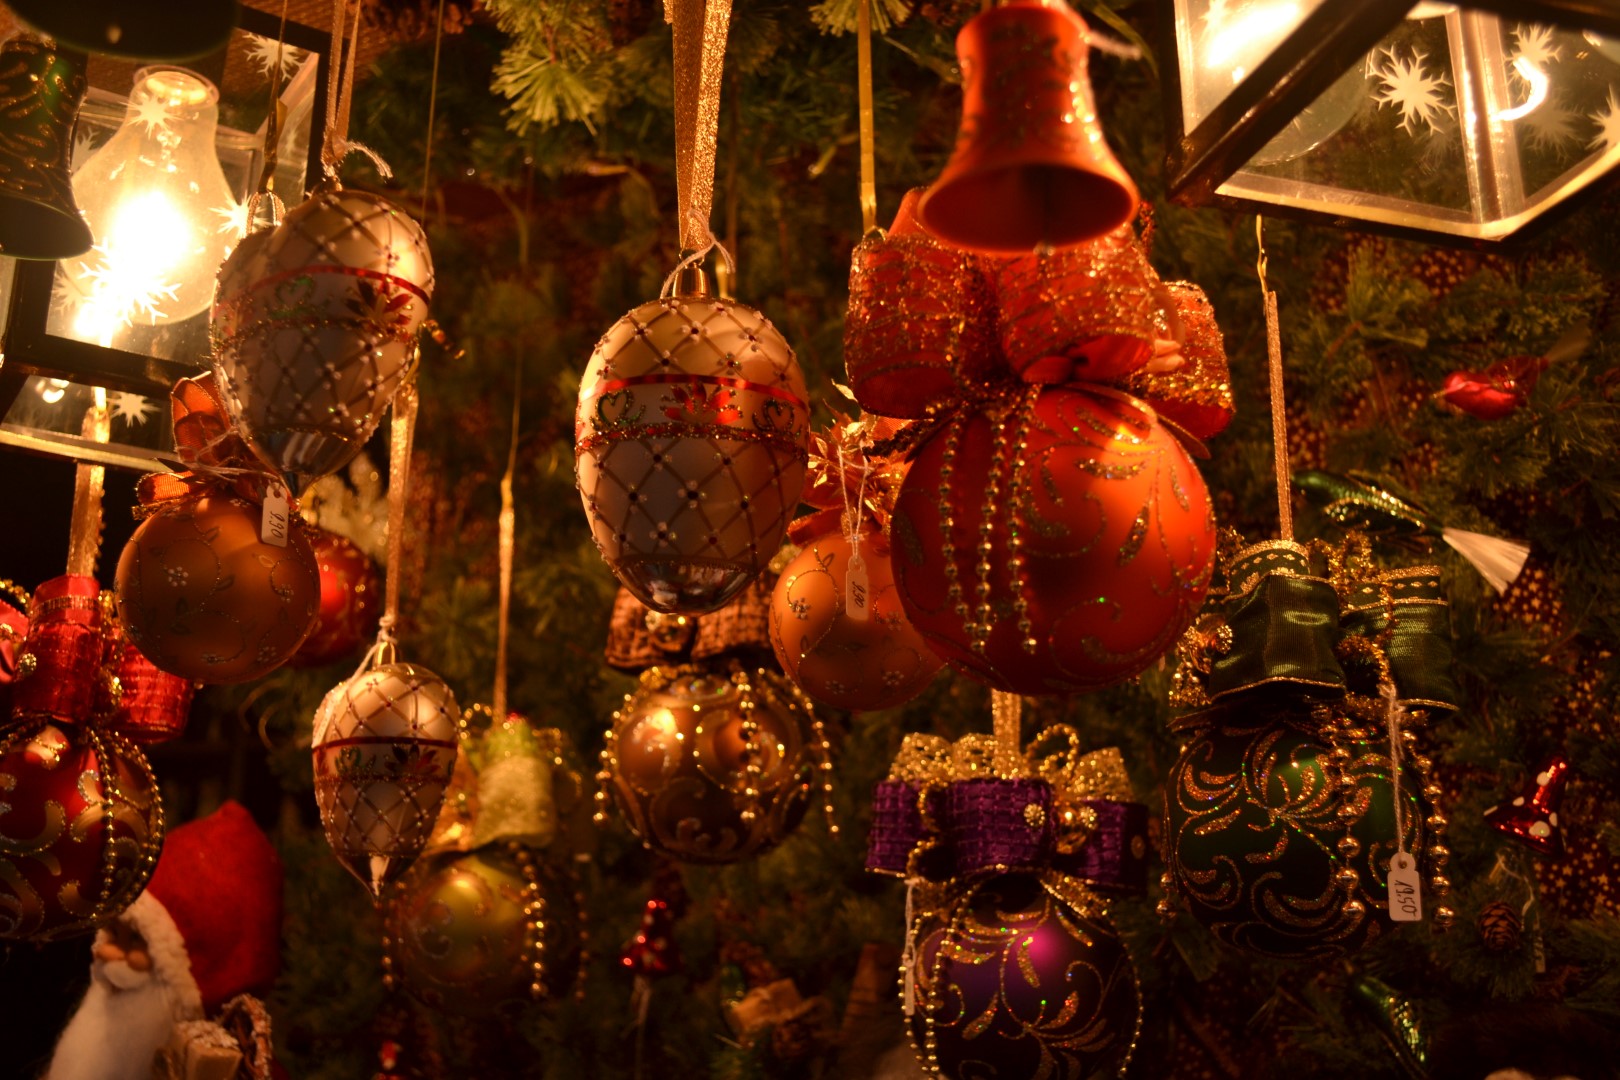 Hand Blown Glass Christmas Ornaments from Germany: A centuries old ...